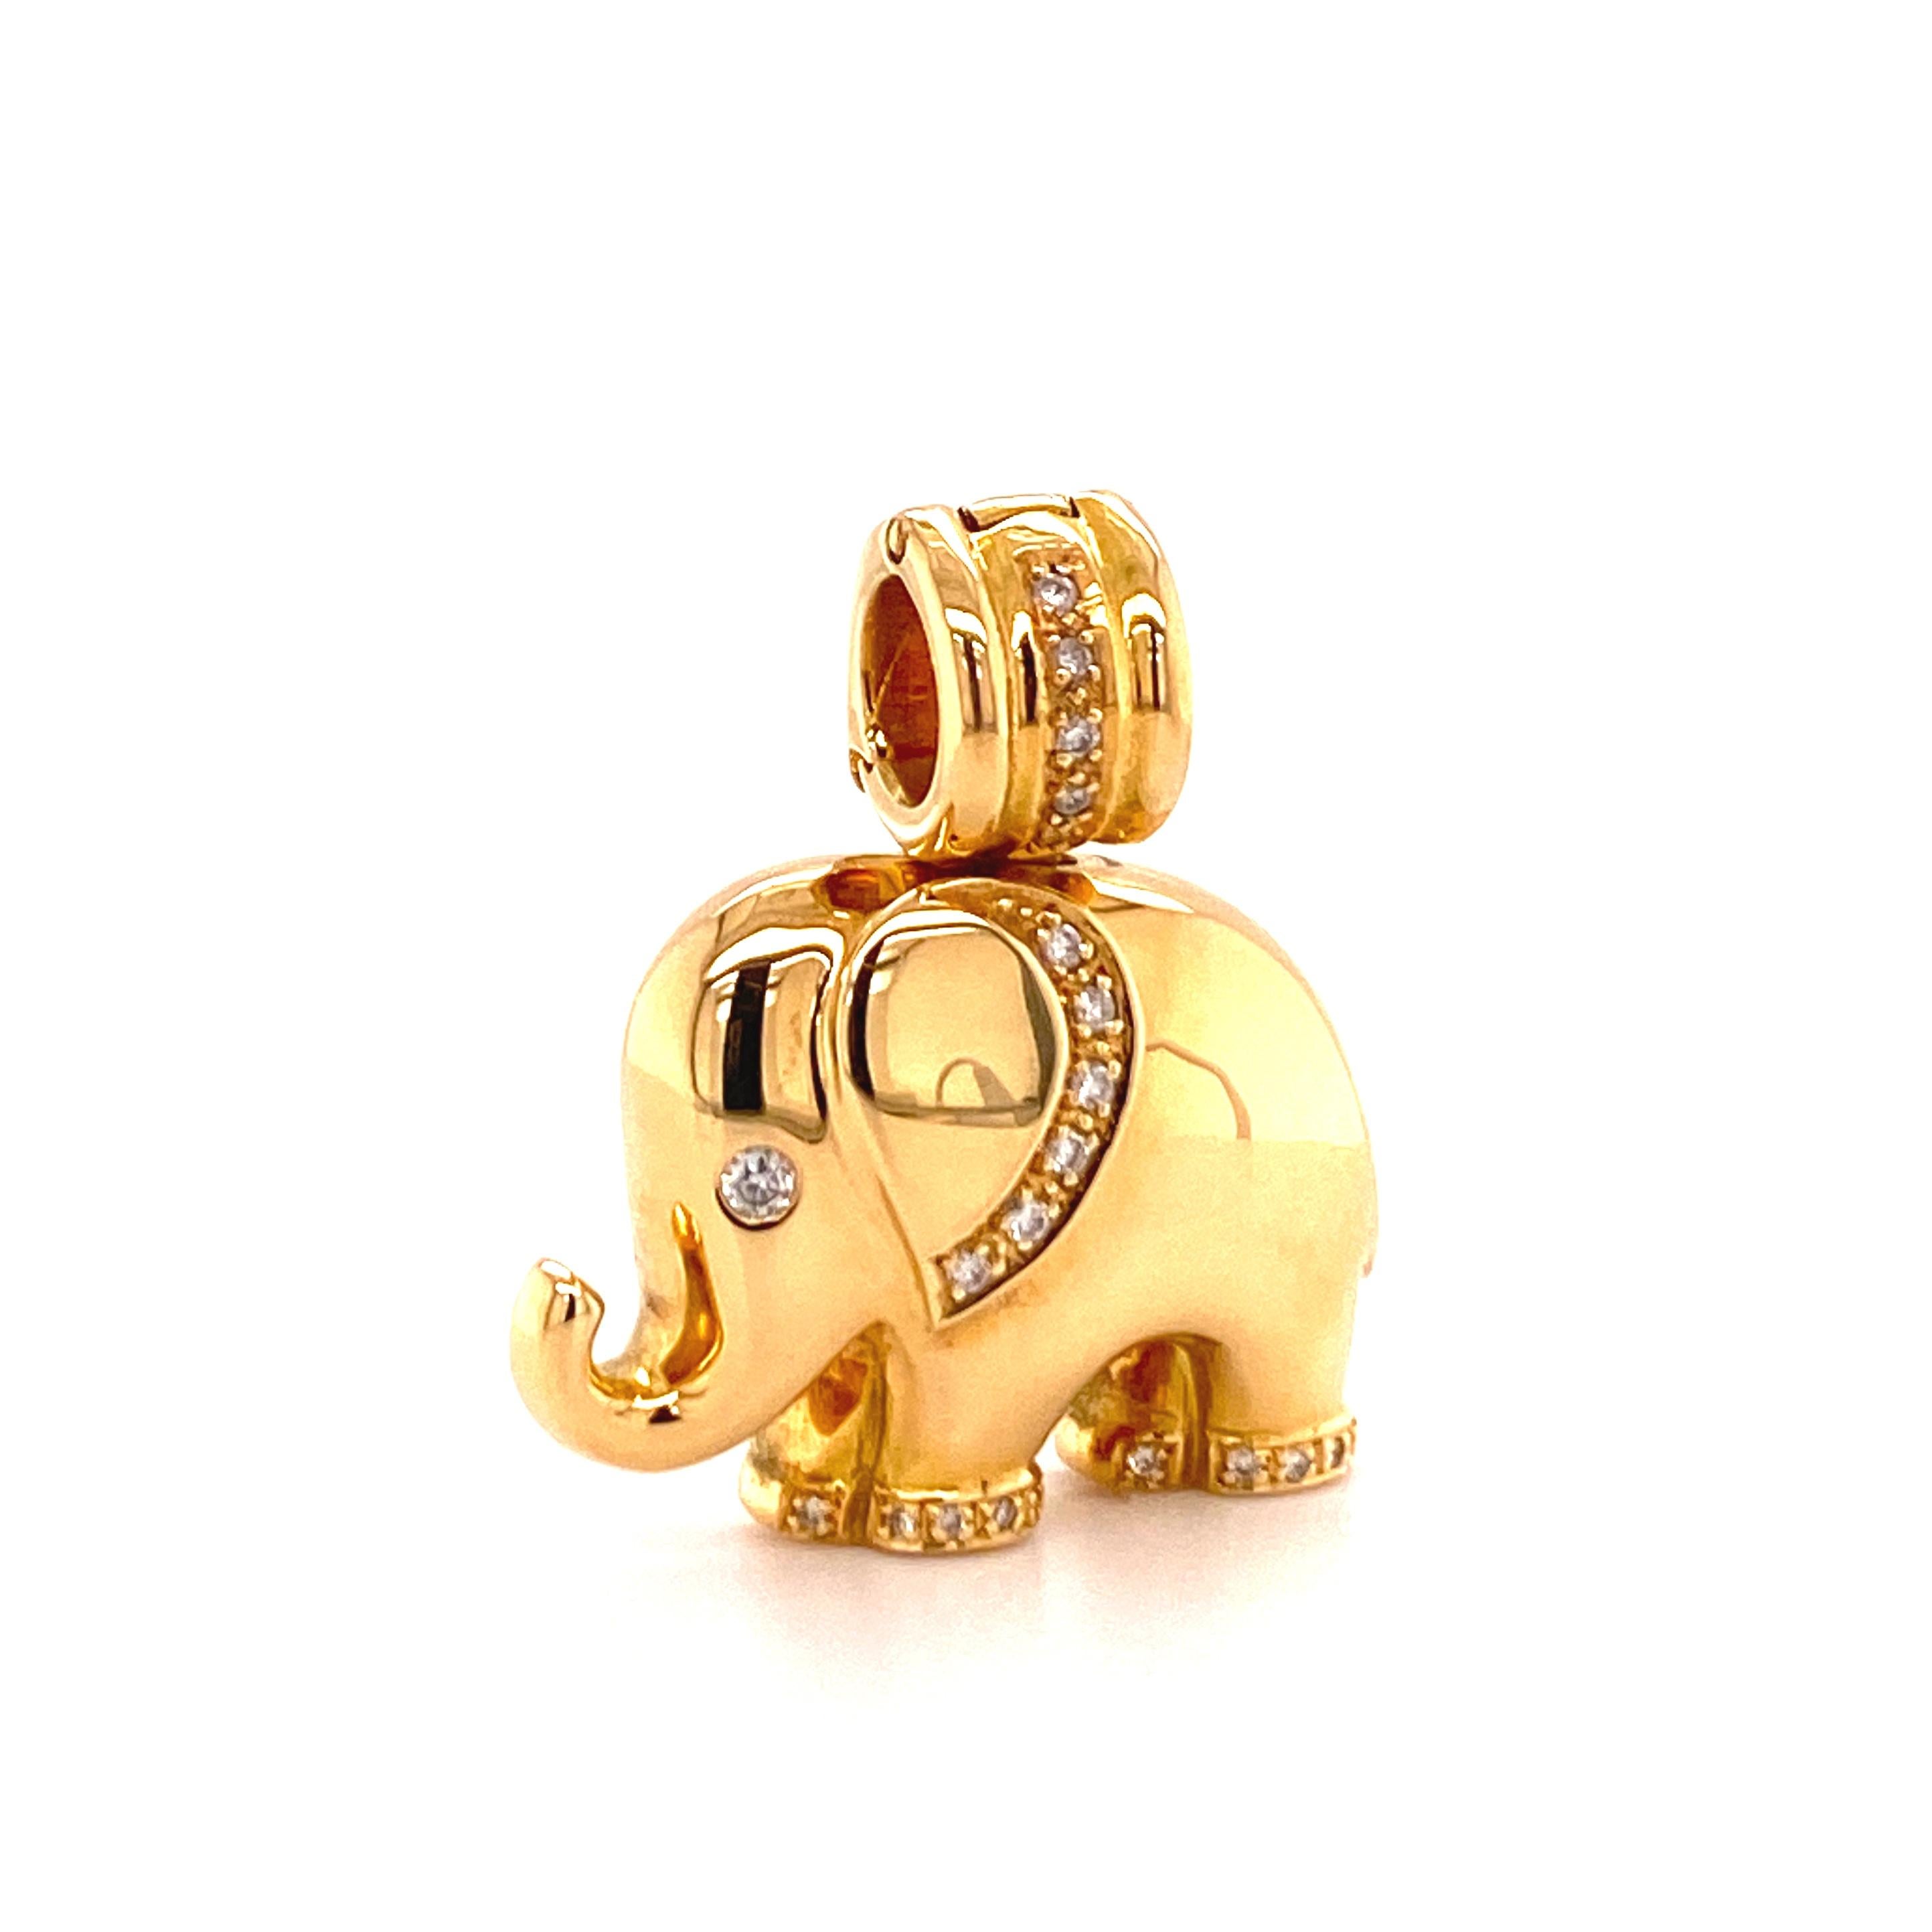 This beautifully curved and shaped elephant pendant in 18 karat yellow gold is set with 22 brilliant-cut diamonds of G/H colour and vs/si clarity, total weight approximately 0.19 carats.

The eyelet can be opened so that the pendant fits on chains